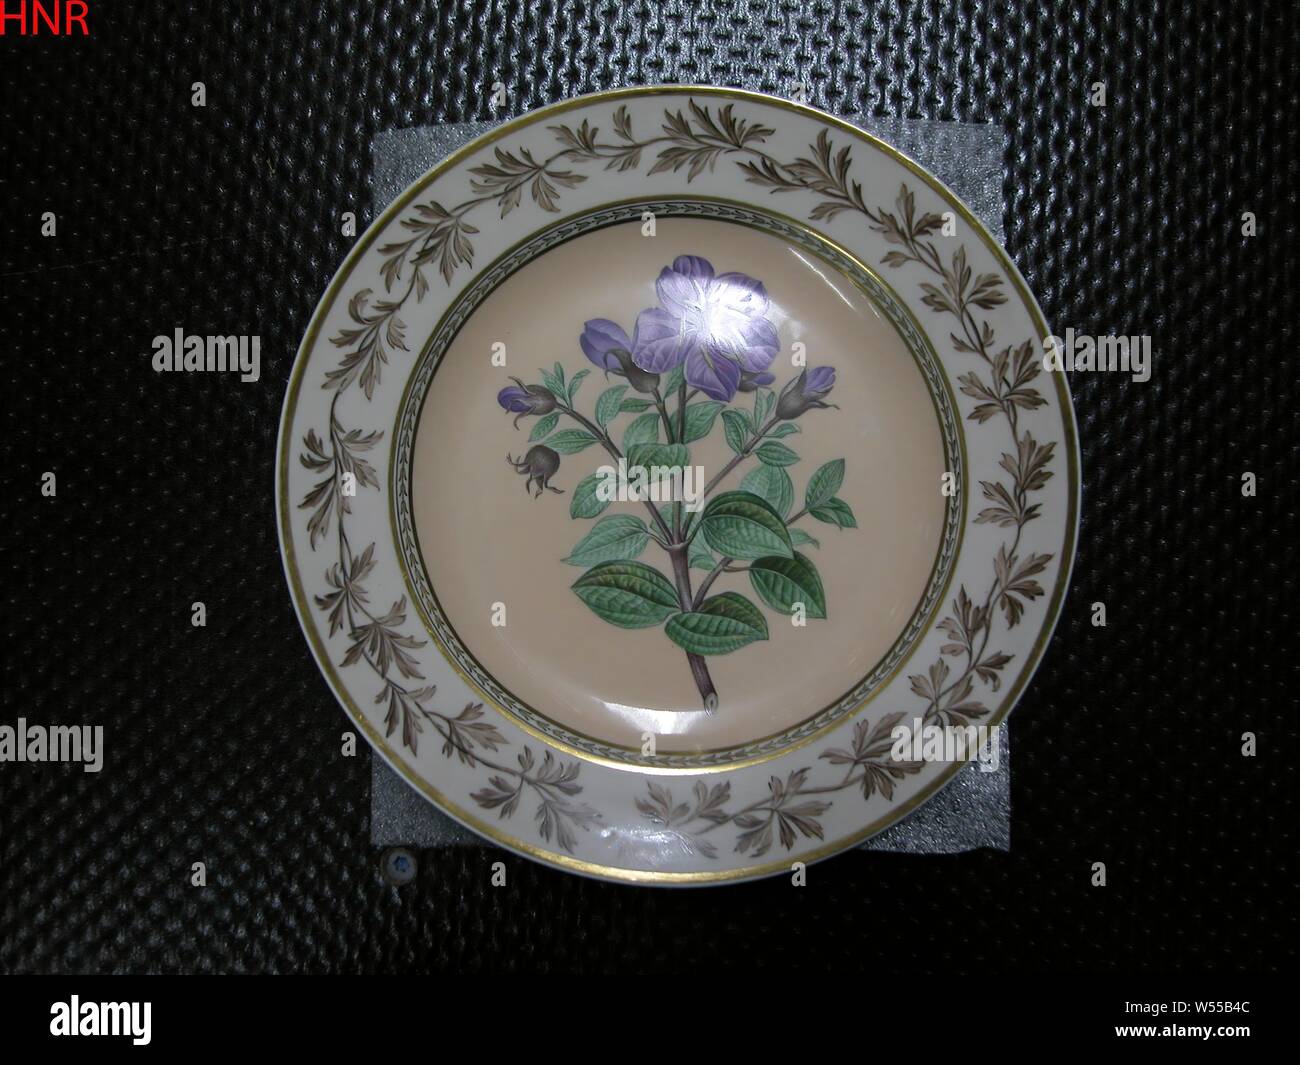 Plate with a flower spray, Porcelain plate, painted on the glaze in green, yellow, purple, brown, black and gold. On the shelf a flower branch on a salmon-colored background. The wall with a narrow decorative band and on the edge a continuous leaf tendril with golden lines. On the underside the inscription 'Rhexia muricata / Popaijan. Marked on the bottom with the scepter, the red eagle, a scepter and a globe in its claws, with K.P.M. and the number 32 III., Königliche Porzellan Manufaktur, Berlin, c. 1825 - c. 1835, porcelain (material), glaze, gold (metal), vitrification, h 3.3 cm d 24.6 cm Stock Photo